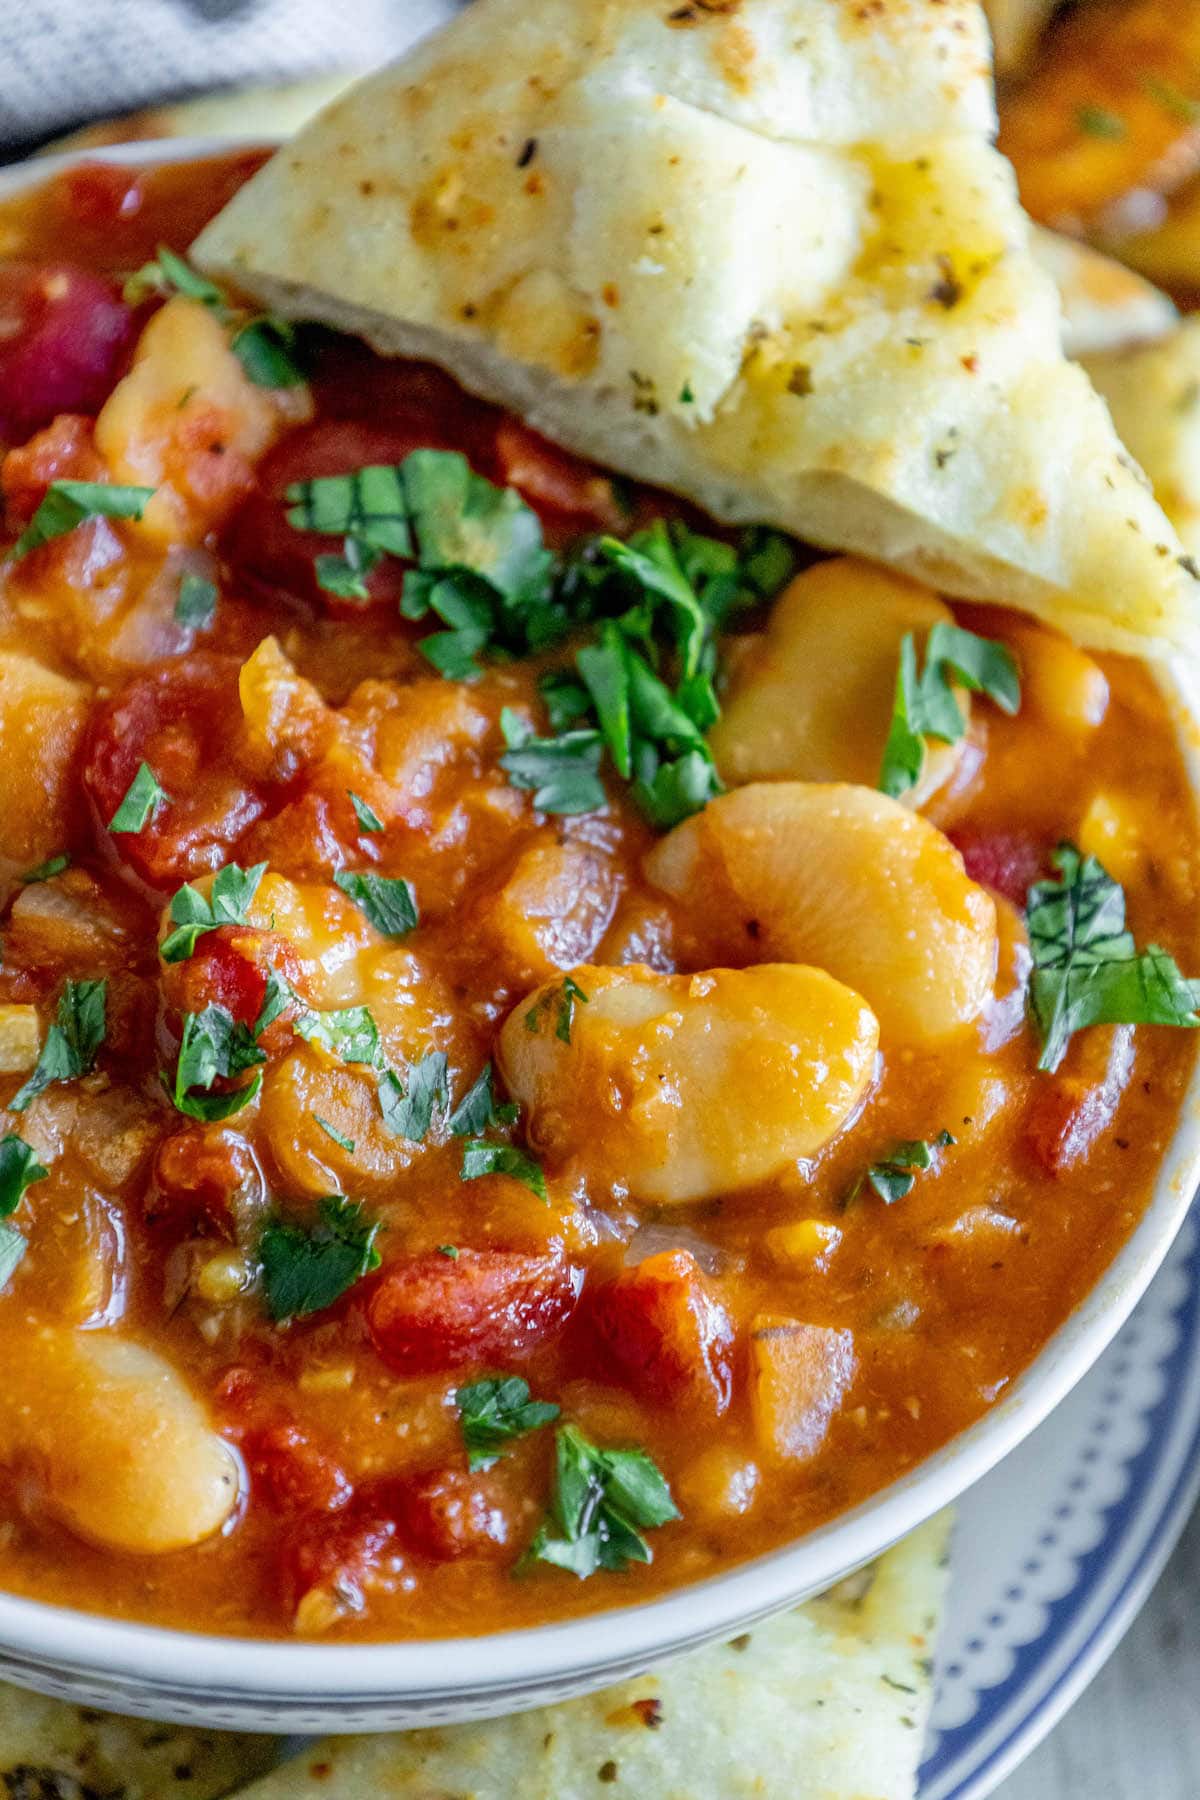 baked greek beans in a tomato sauce with chopped herbs and giant white beans